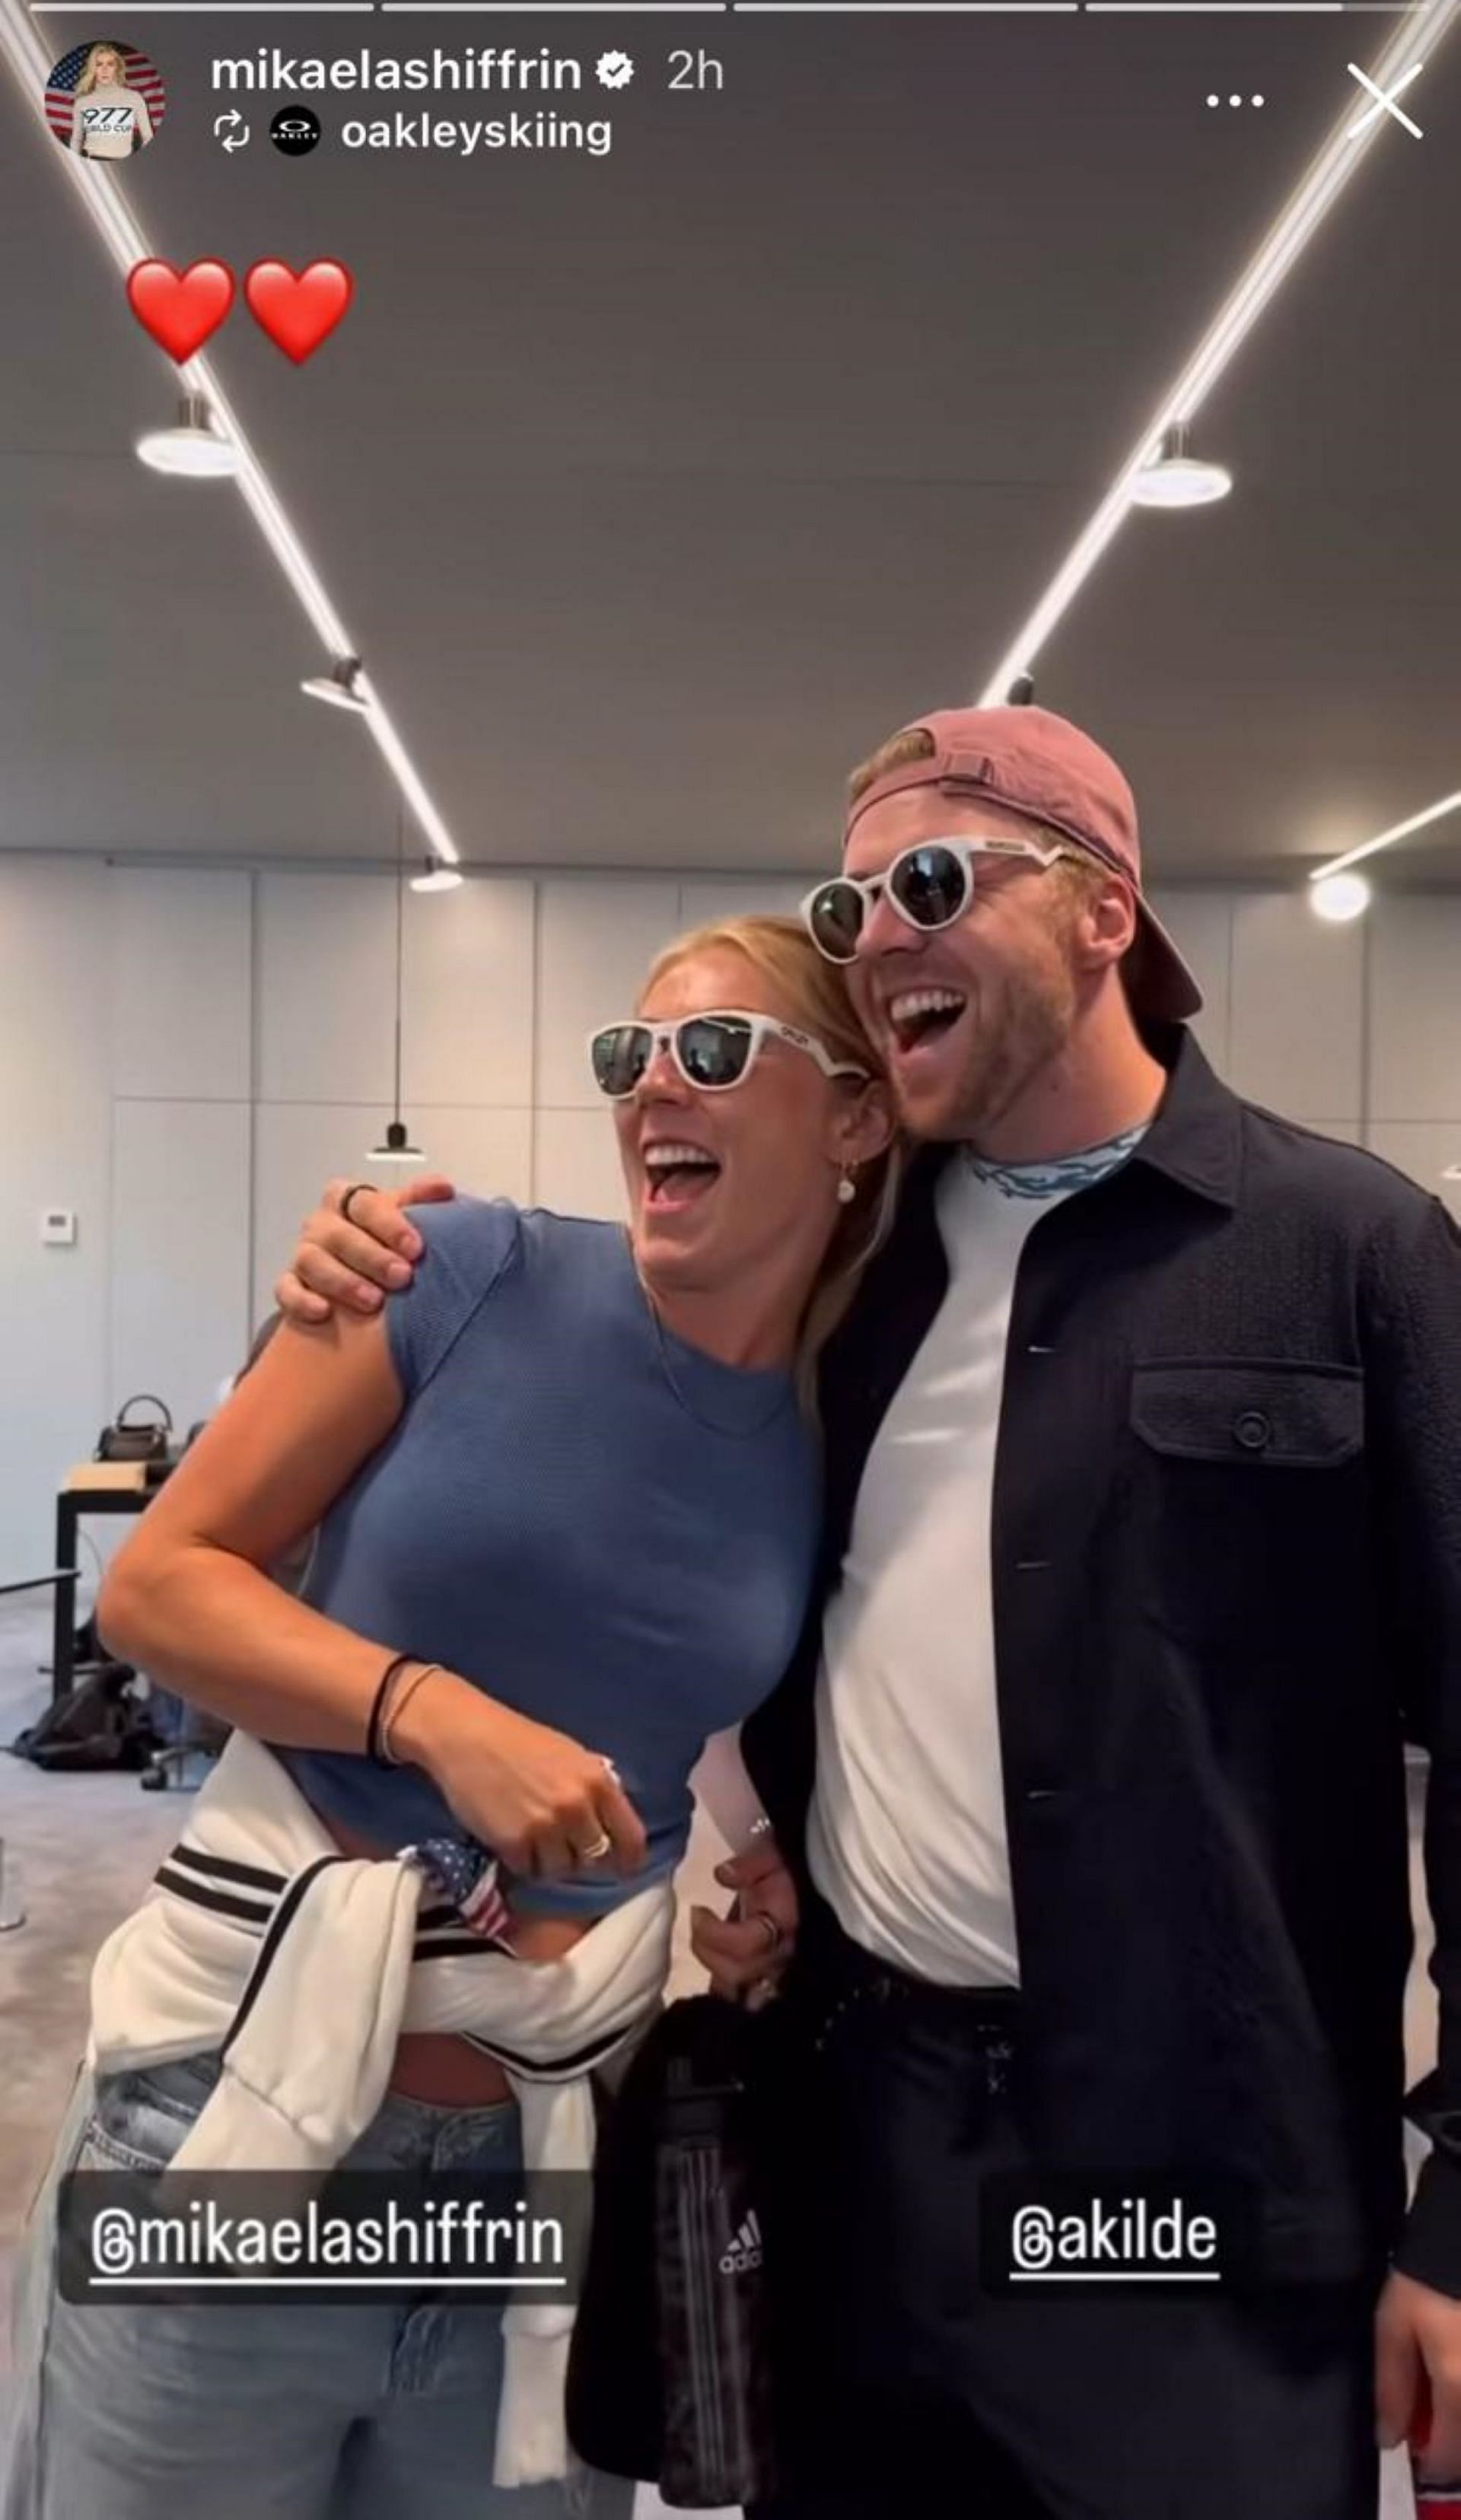 Mikaela Shiffrin and Alexander Kilde swoon over their new Oakley sunglasses, SOURCE: Shiffrin Insta